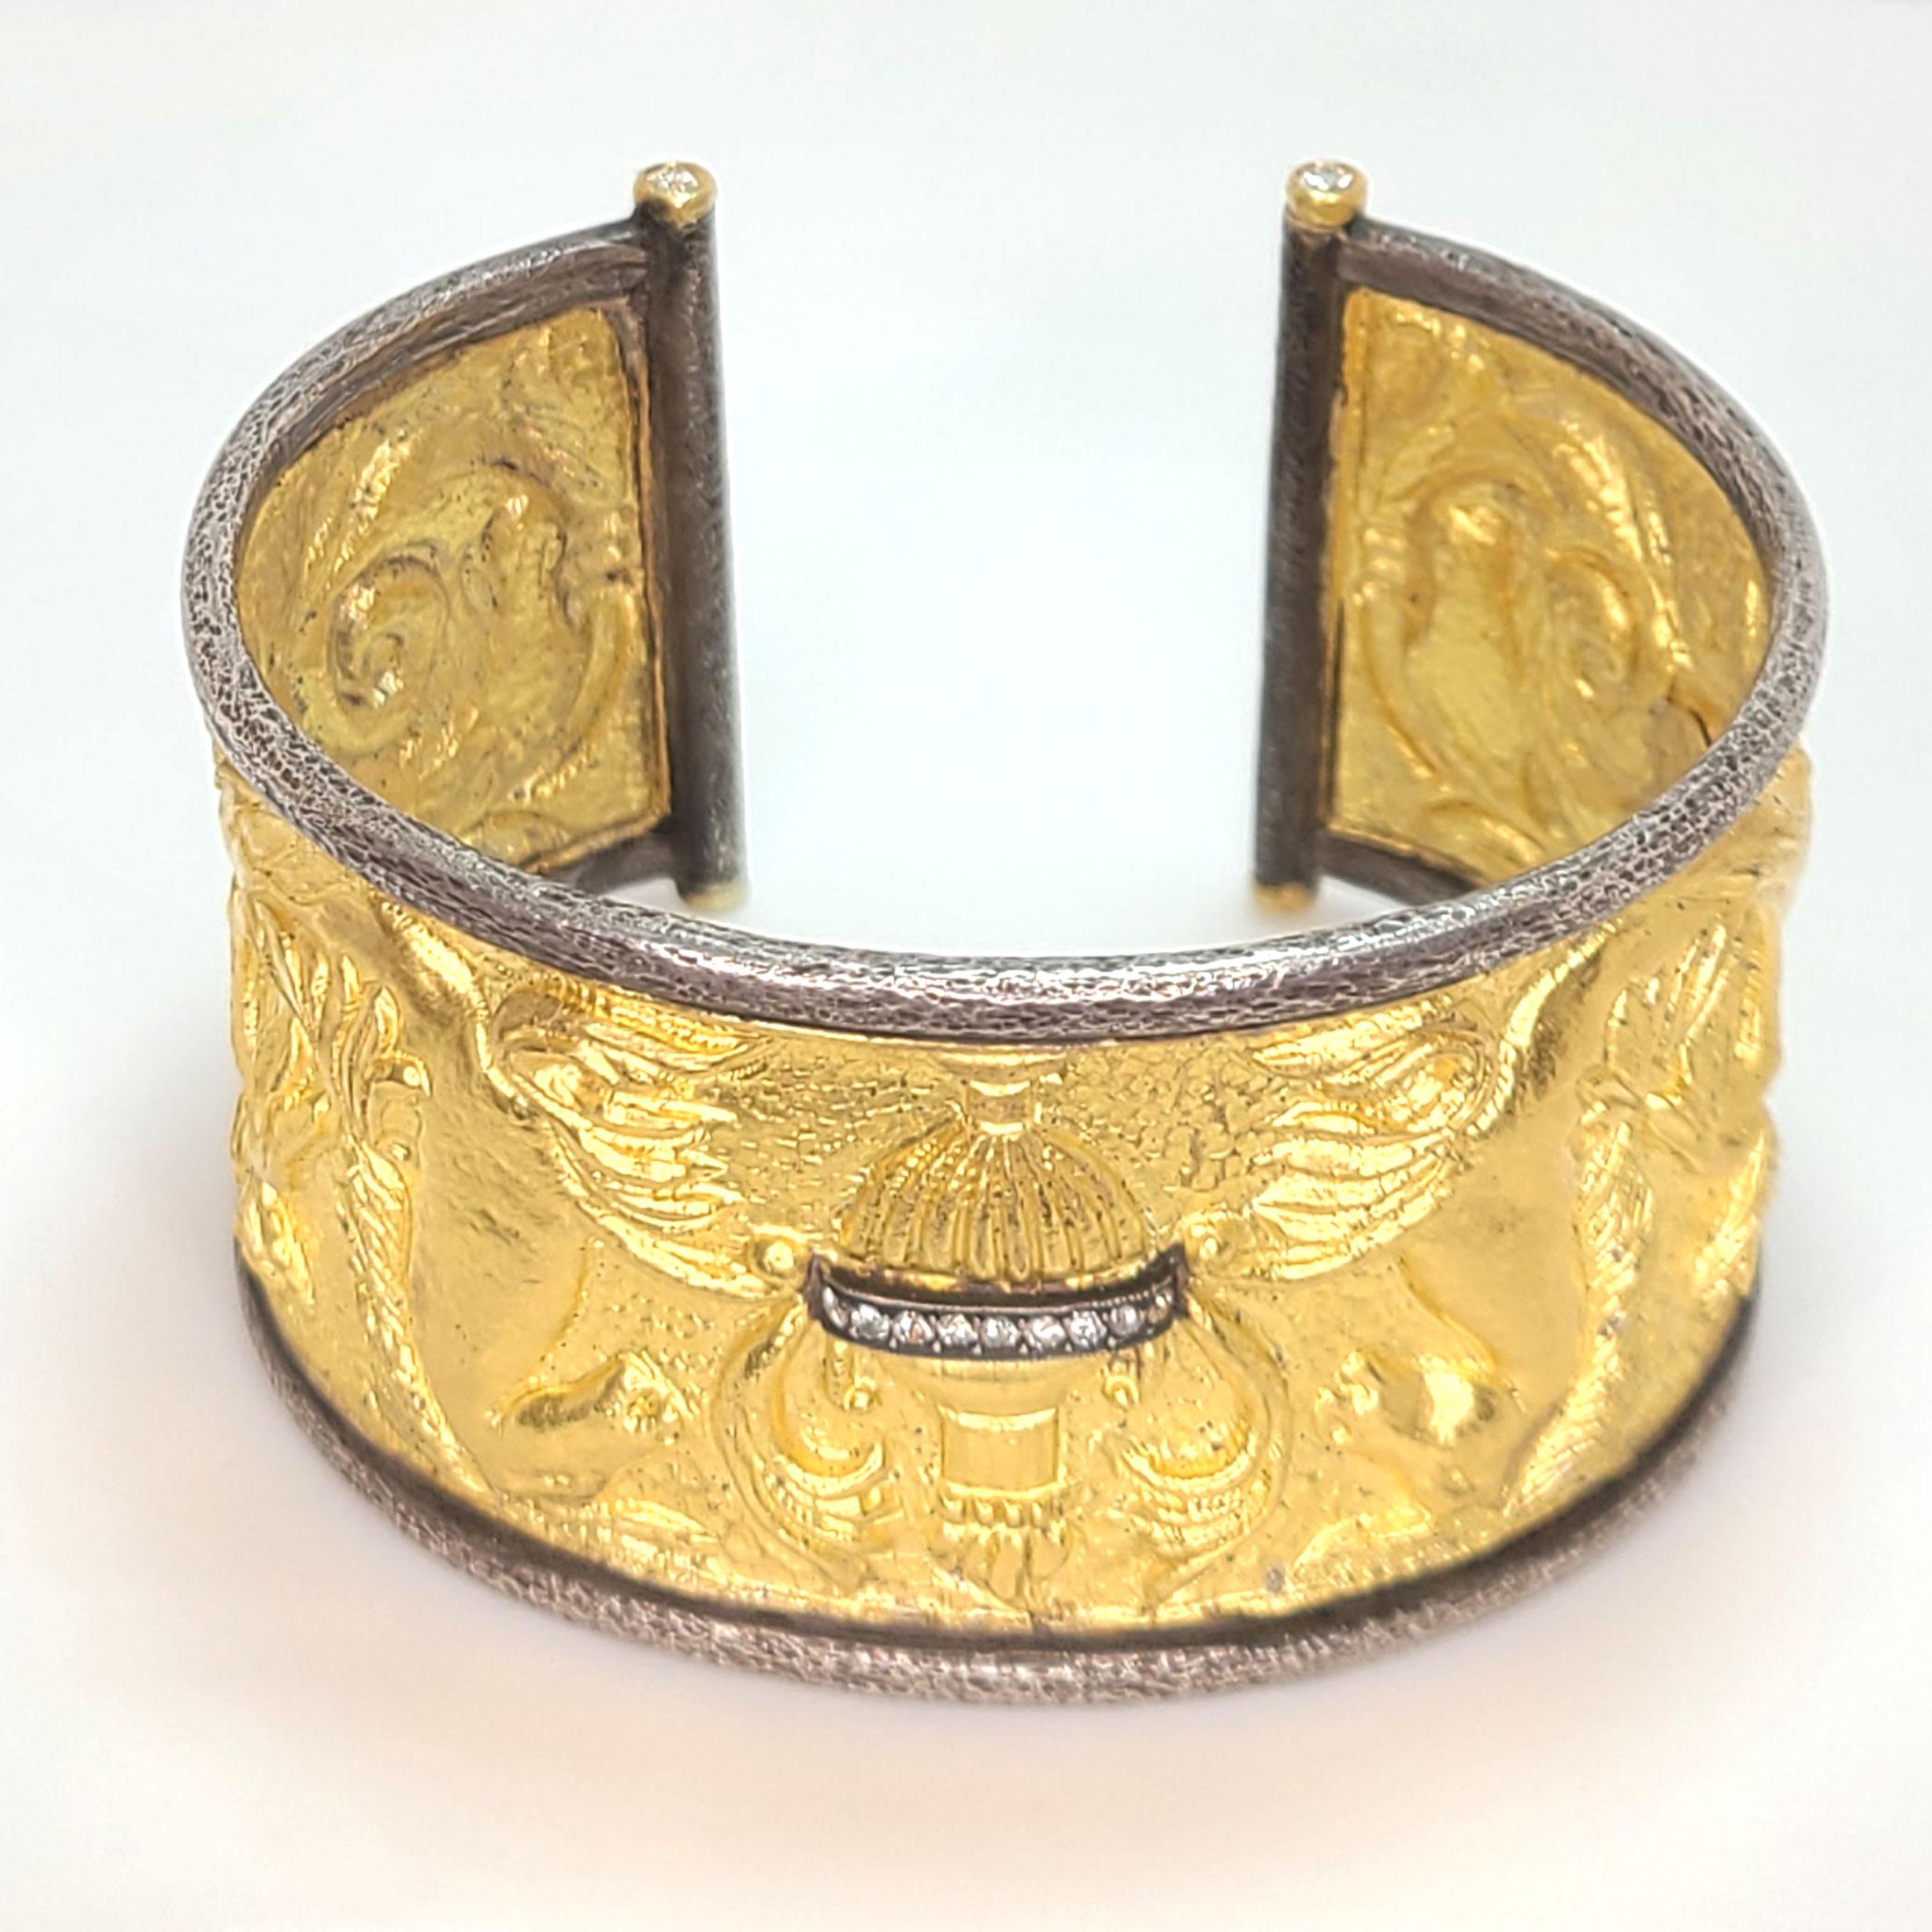 This 24k gold cuff bracelet relates back to ancient Greek times. The urn on the front of the bracelet is encrusted with round diamonds and there are additional 4 round brilliant diamonds one on each corner at the ends of the bracelet. It is